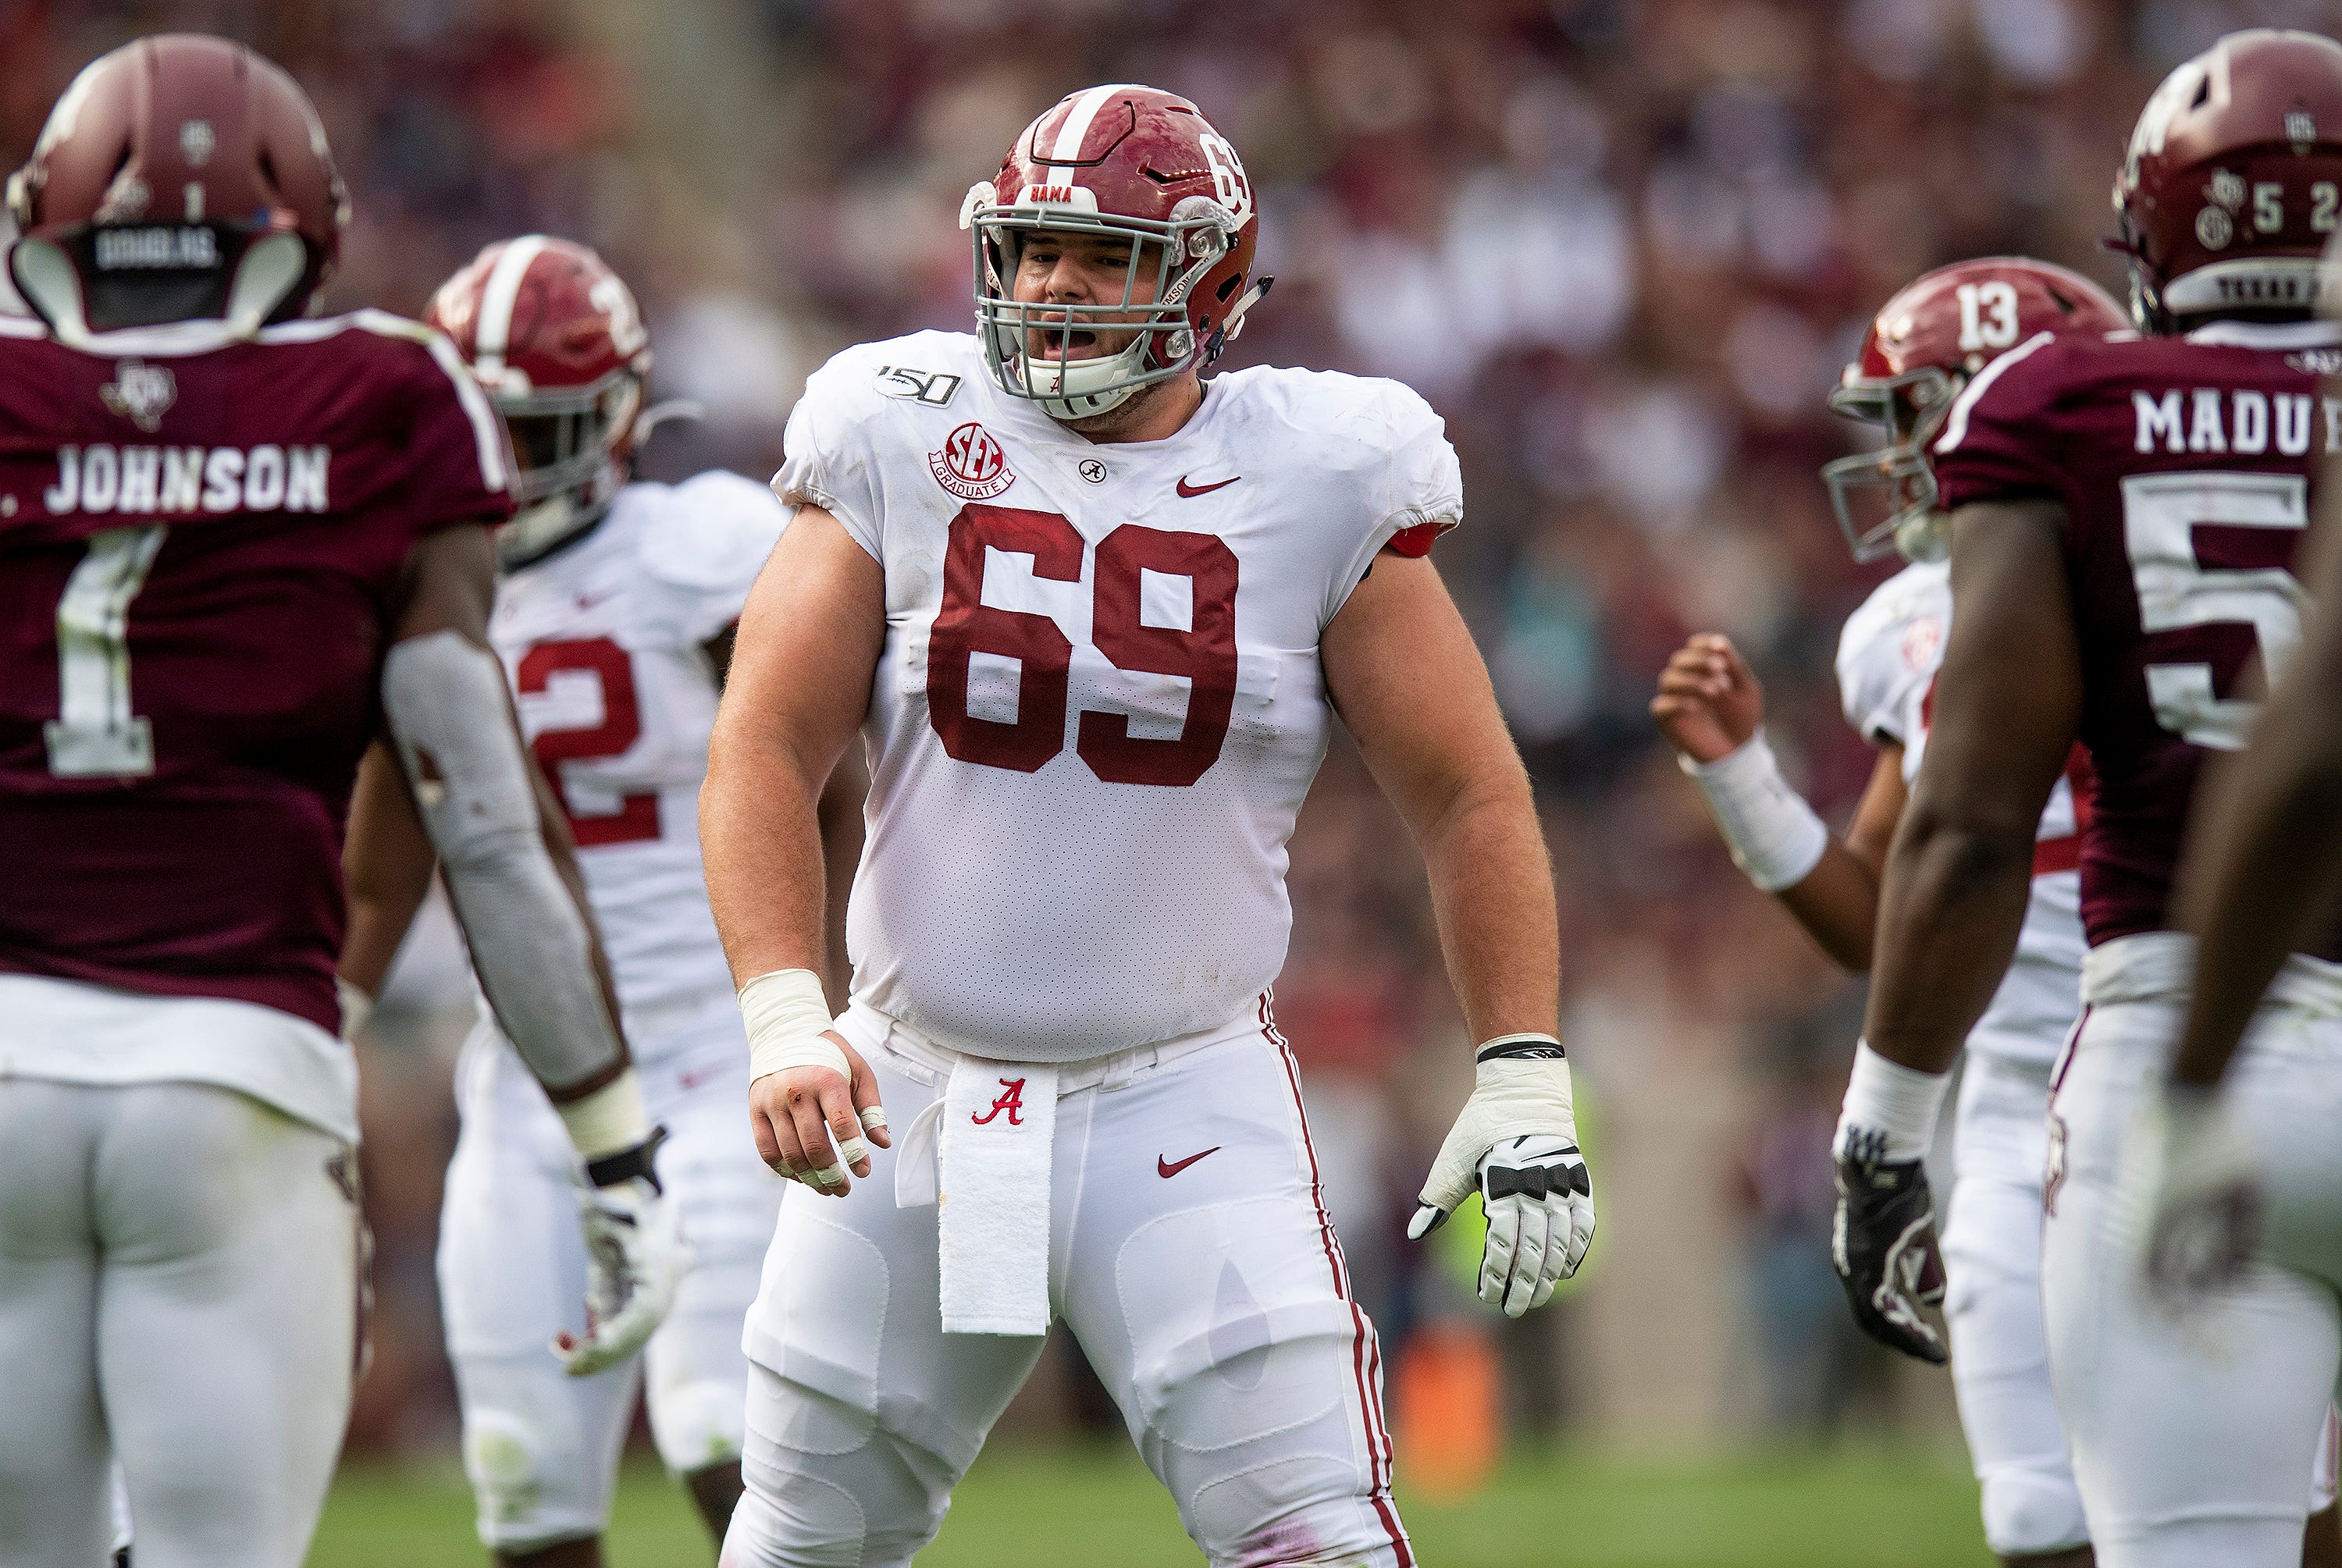 Alabama offensive lineman Landon Dickerson (69) against Texas A&M at Kyle Field in College Station, Texas on Saturday October 12, 2019.